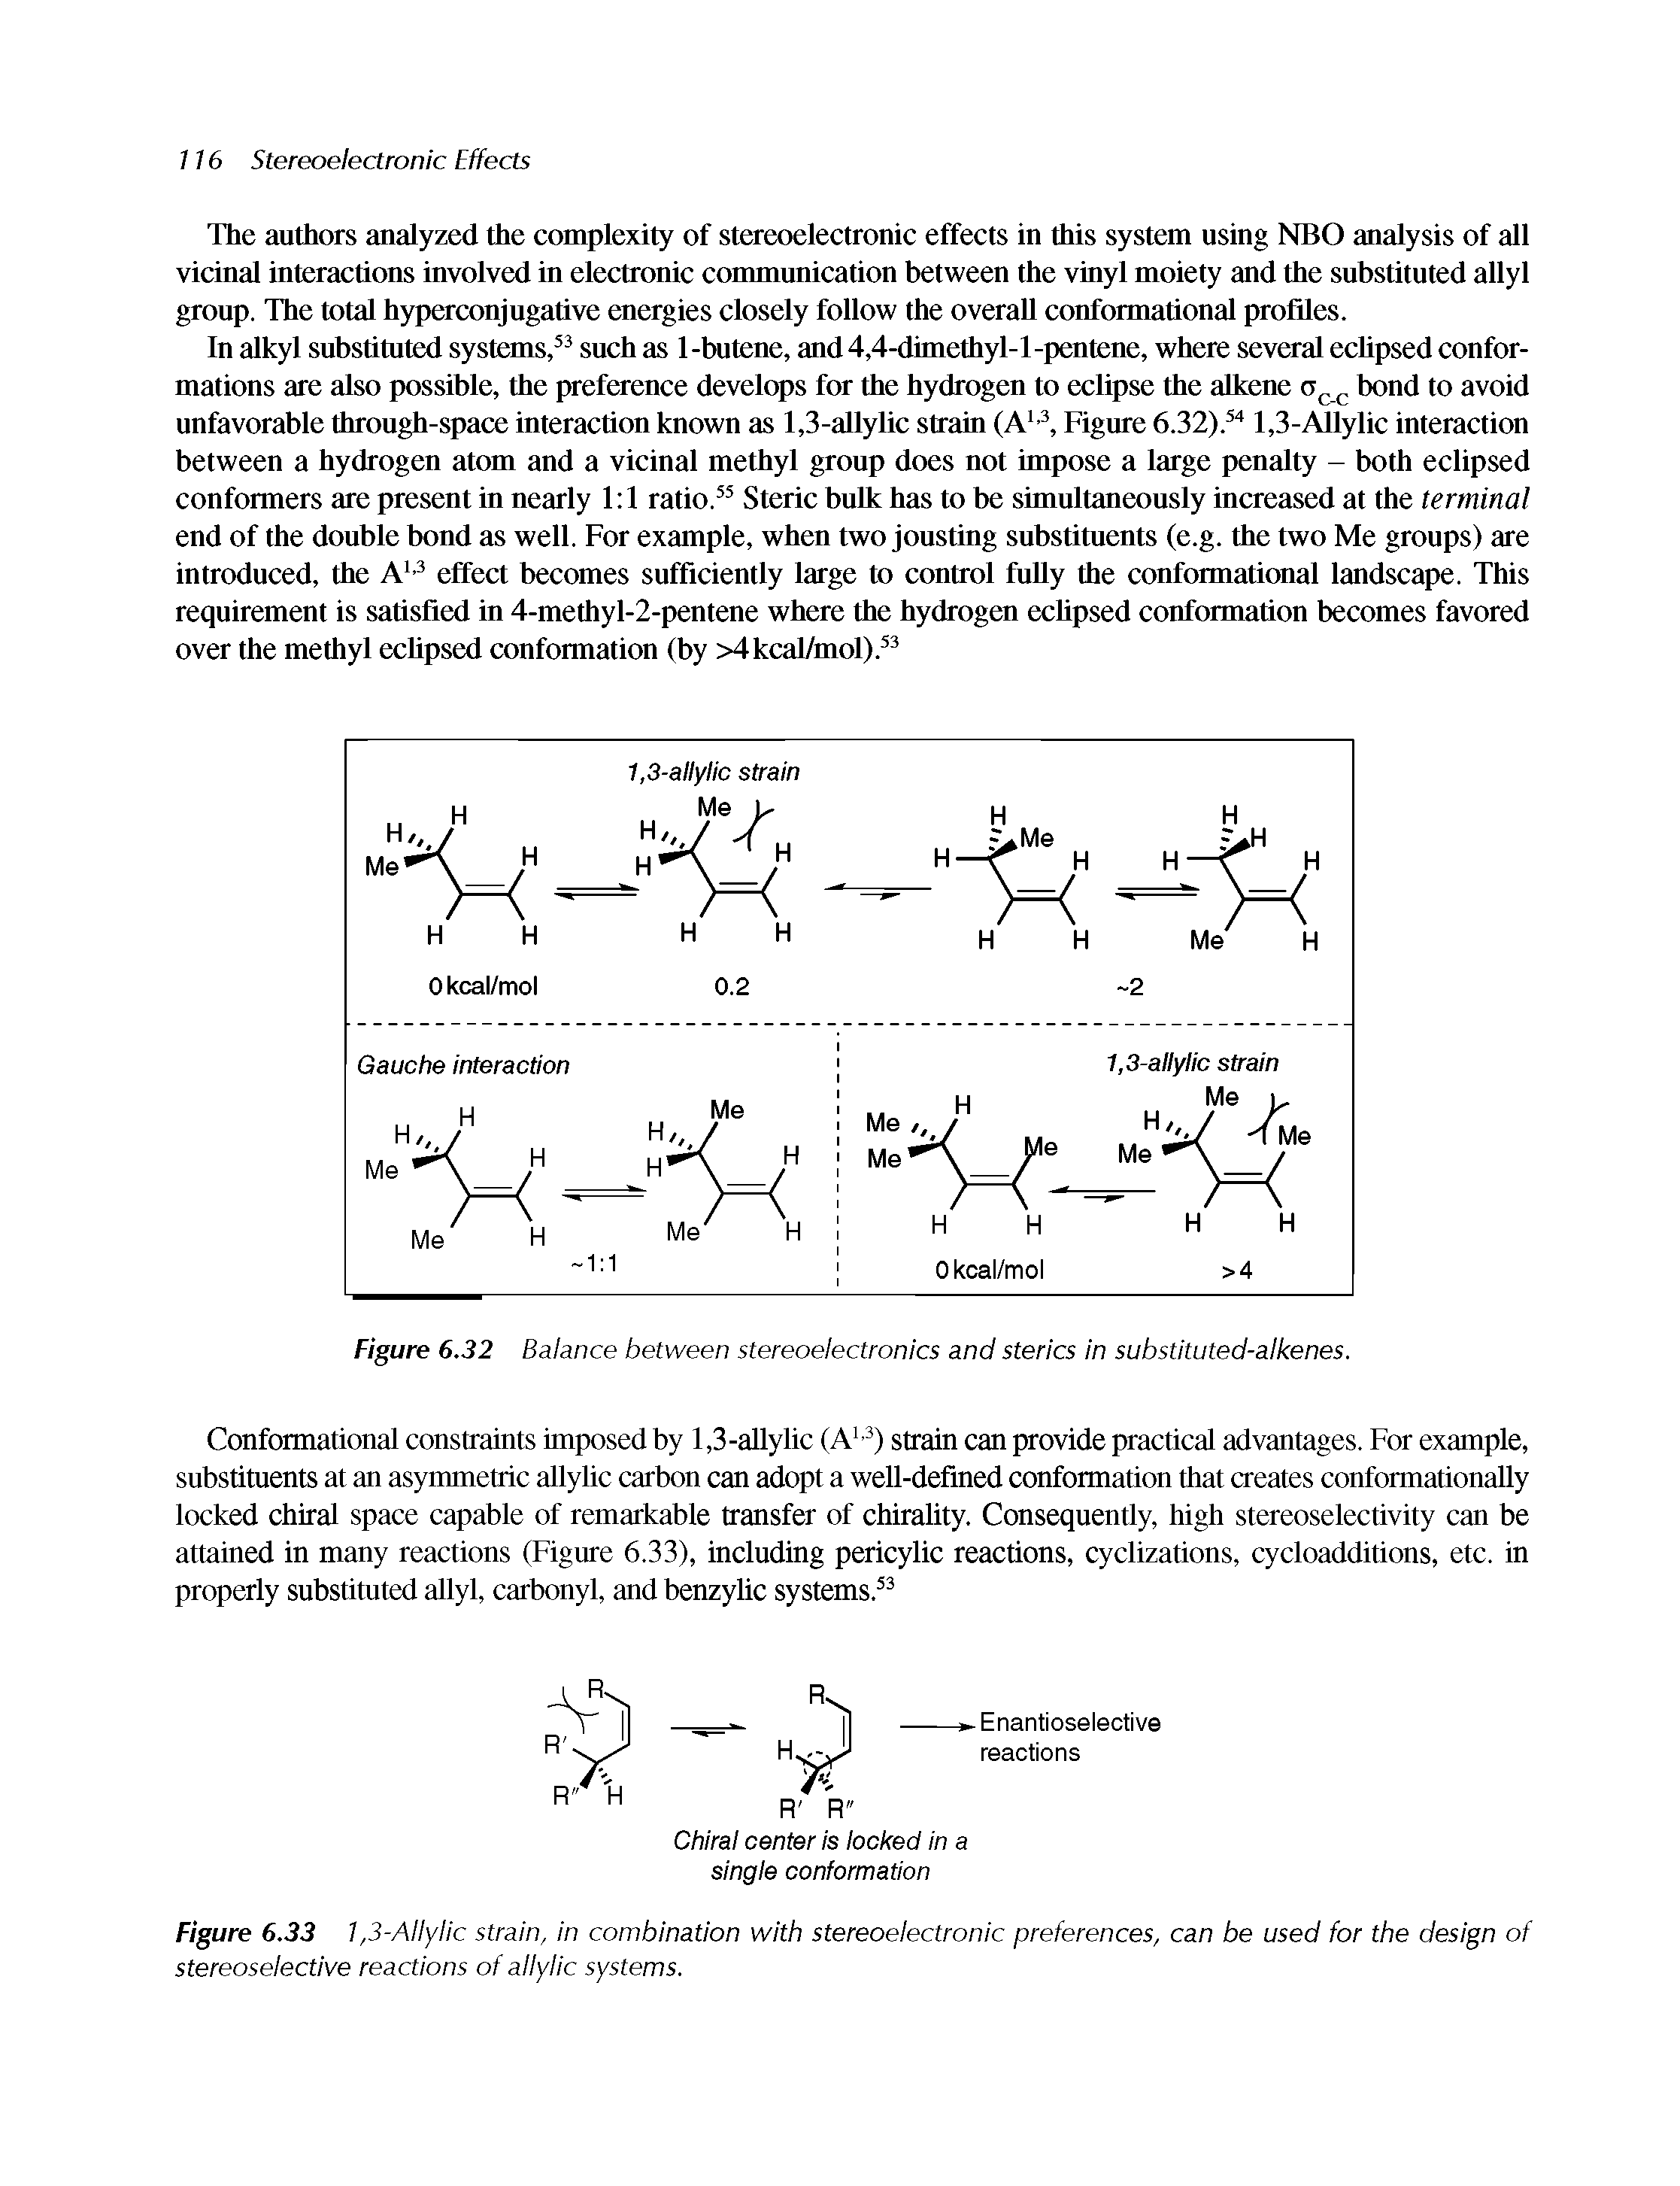 Figure 6.33 1,3-Allylic strain, in combination with stereoelectronic preferences, can be used for the design of stereoselective reactions of allylic systems.